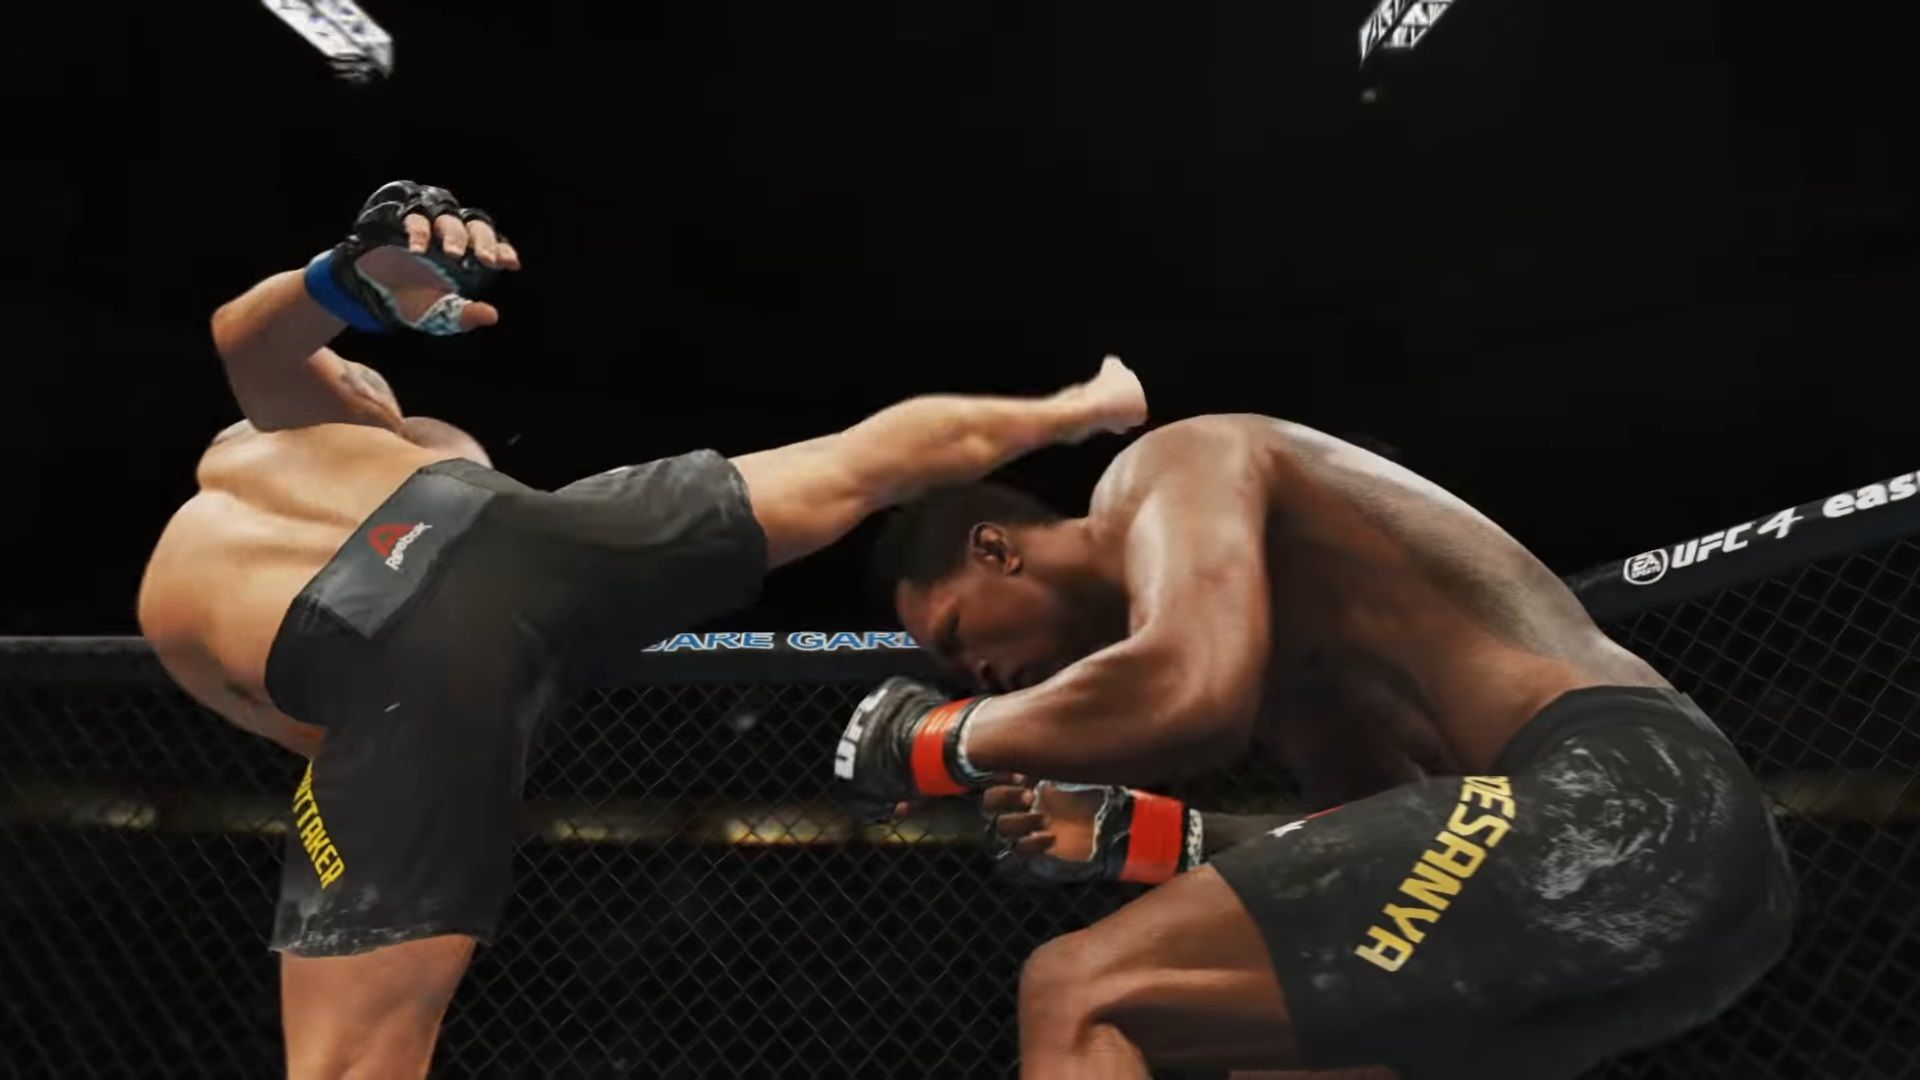 Riseks in EA SPORTS UFC 4 Now Available Worldwide